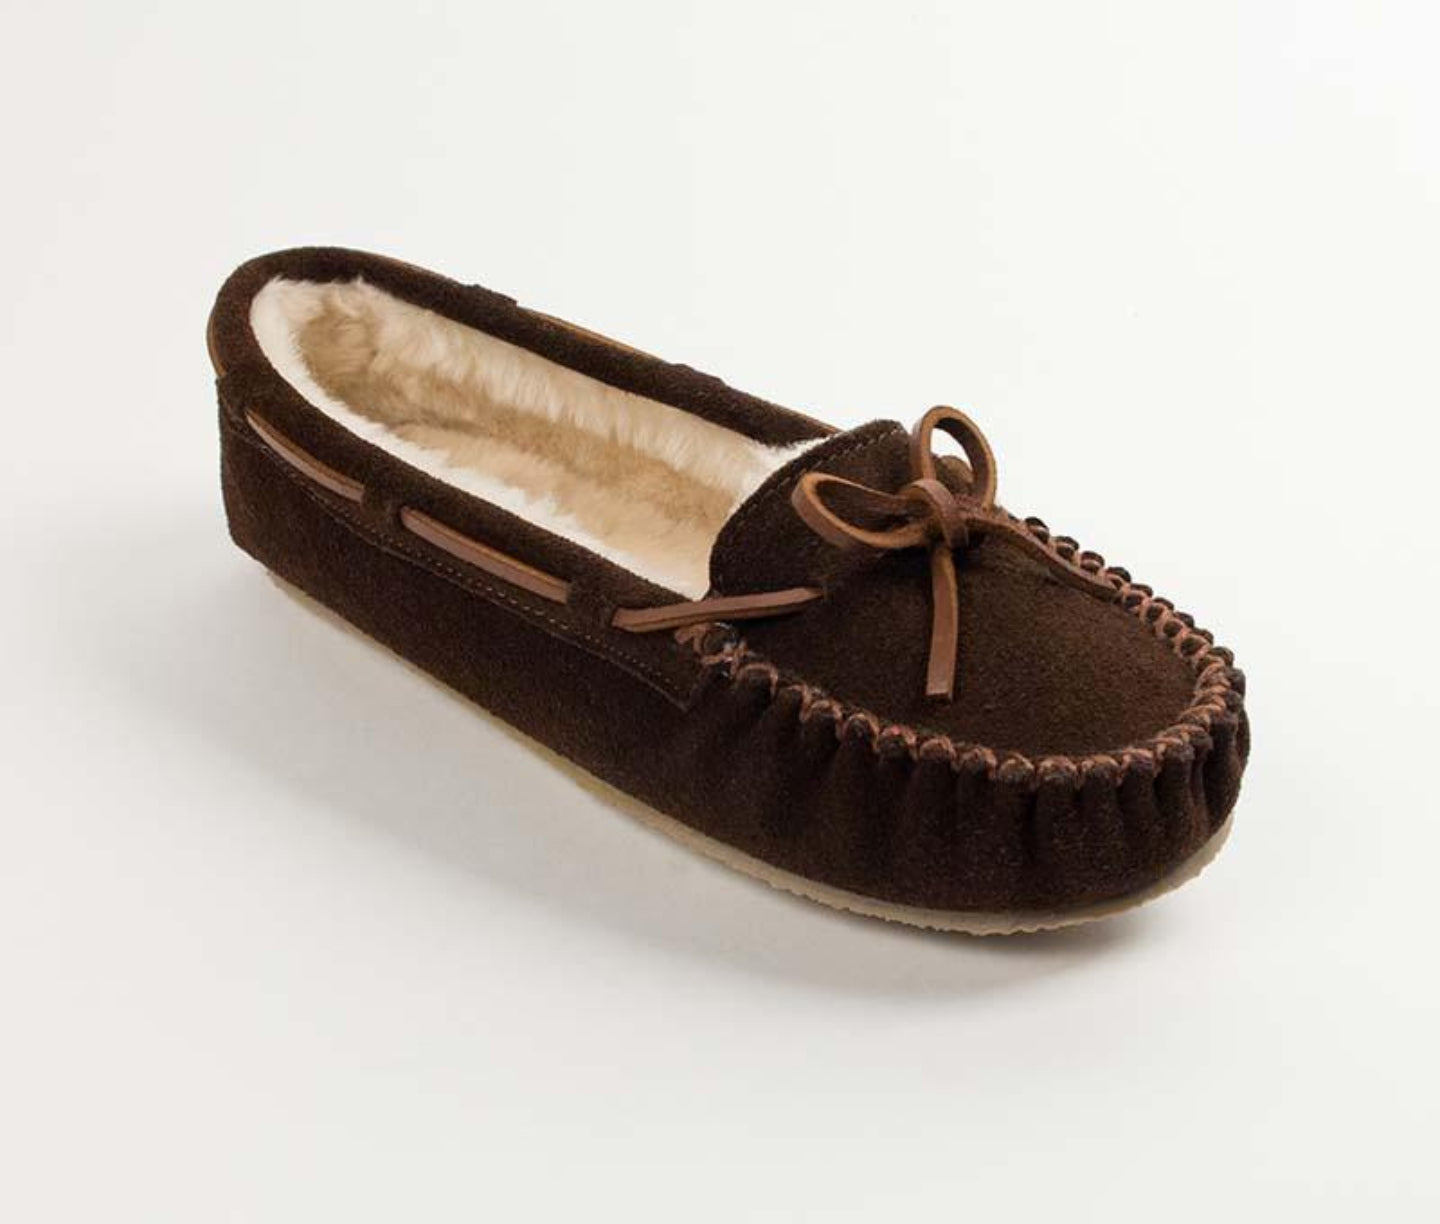 Cally Slipper in Chocolate from 3/4 Angle View